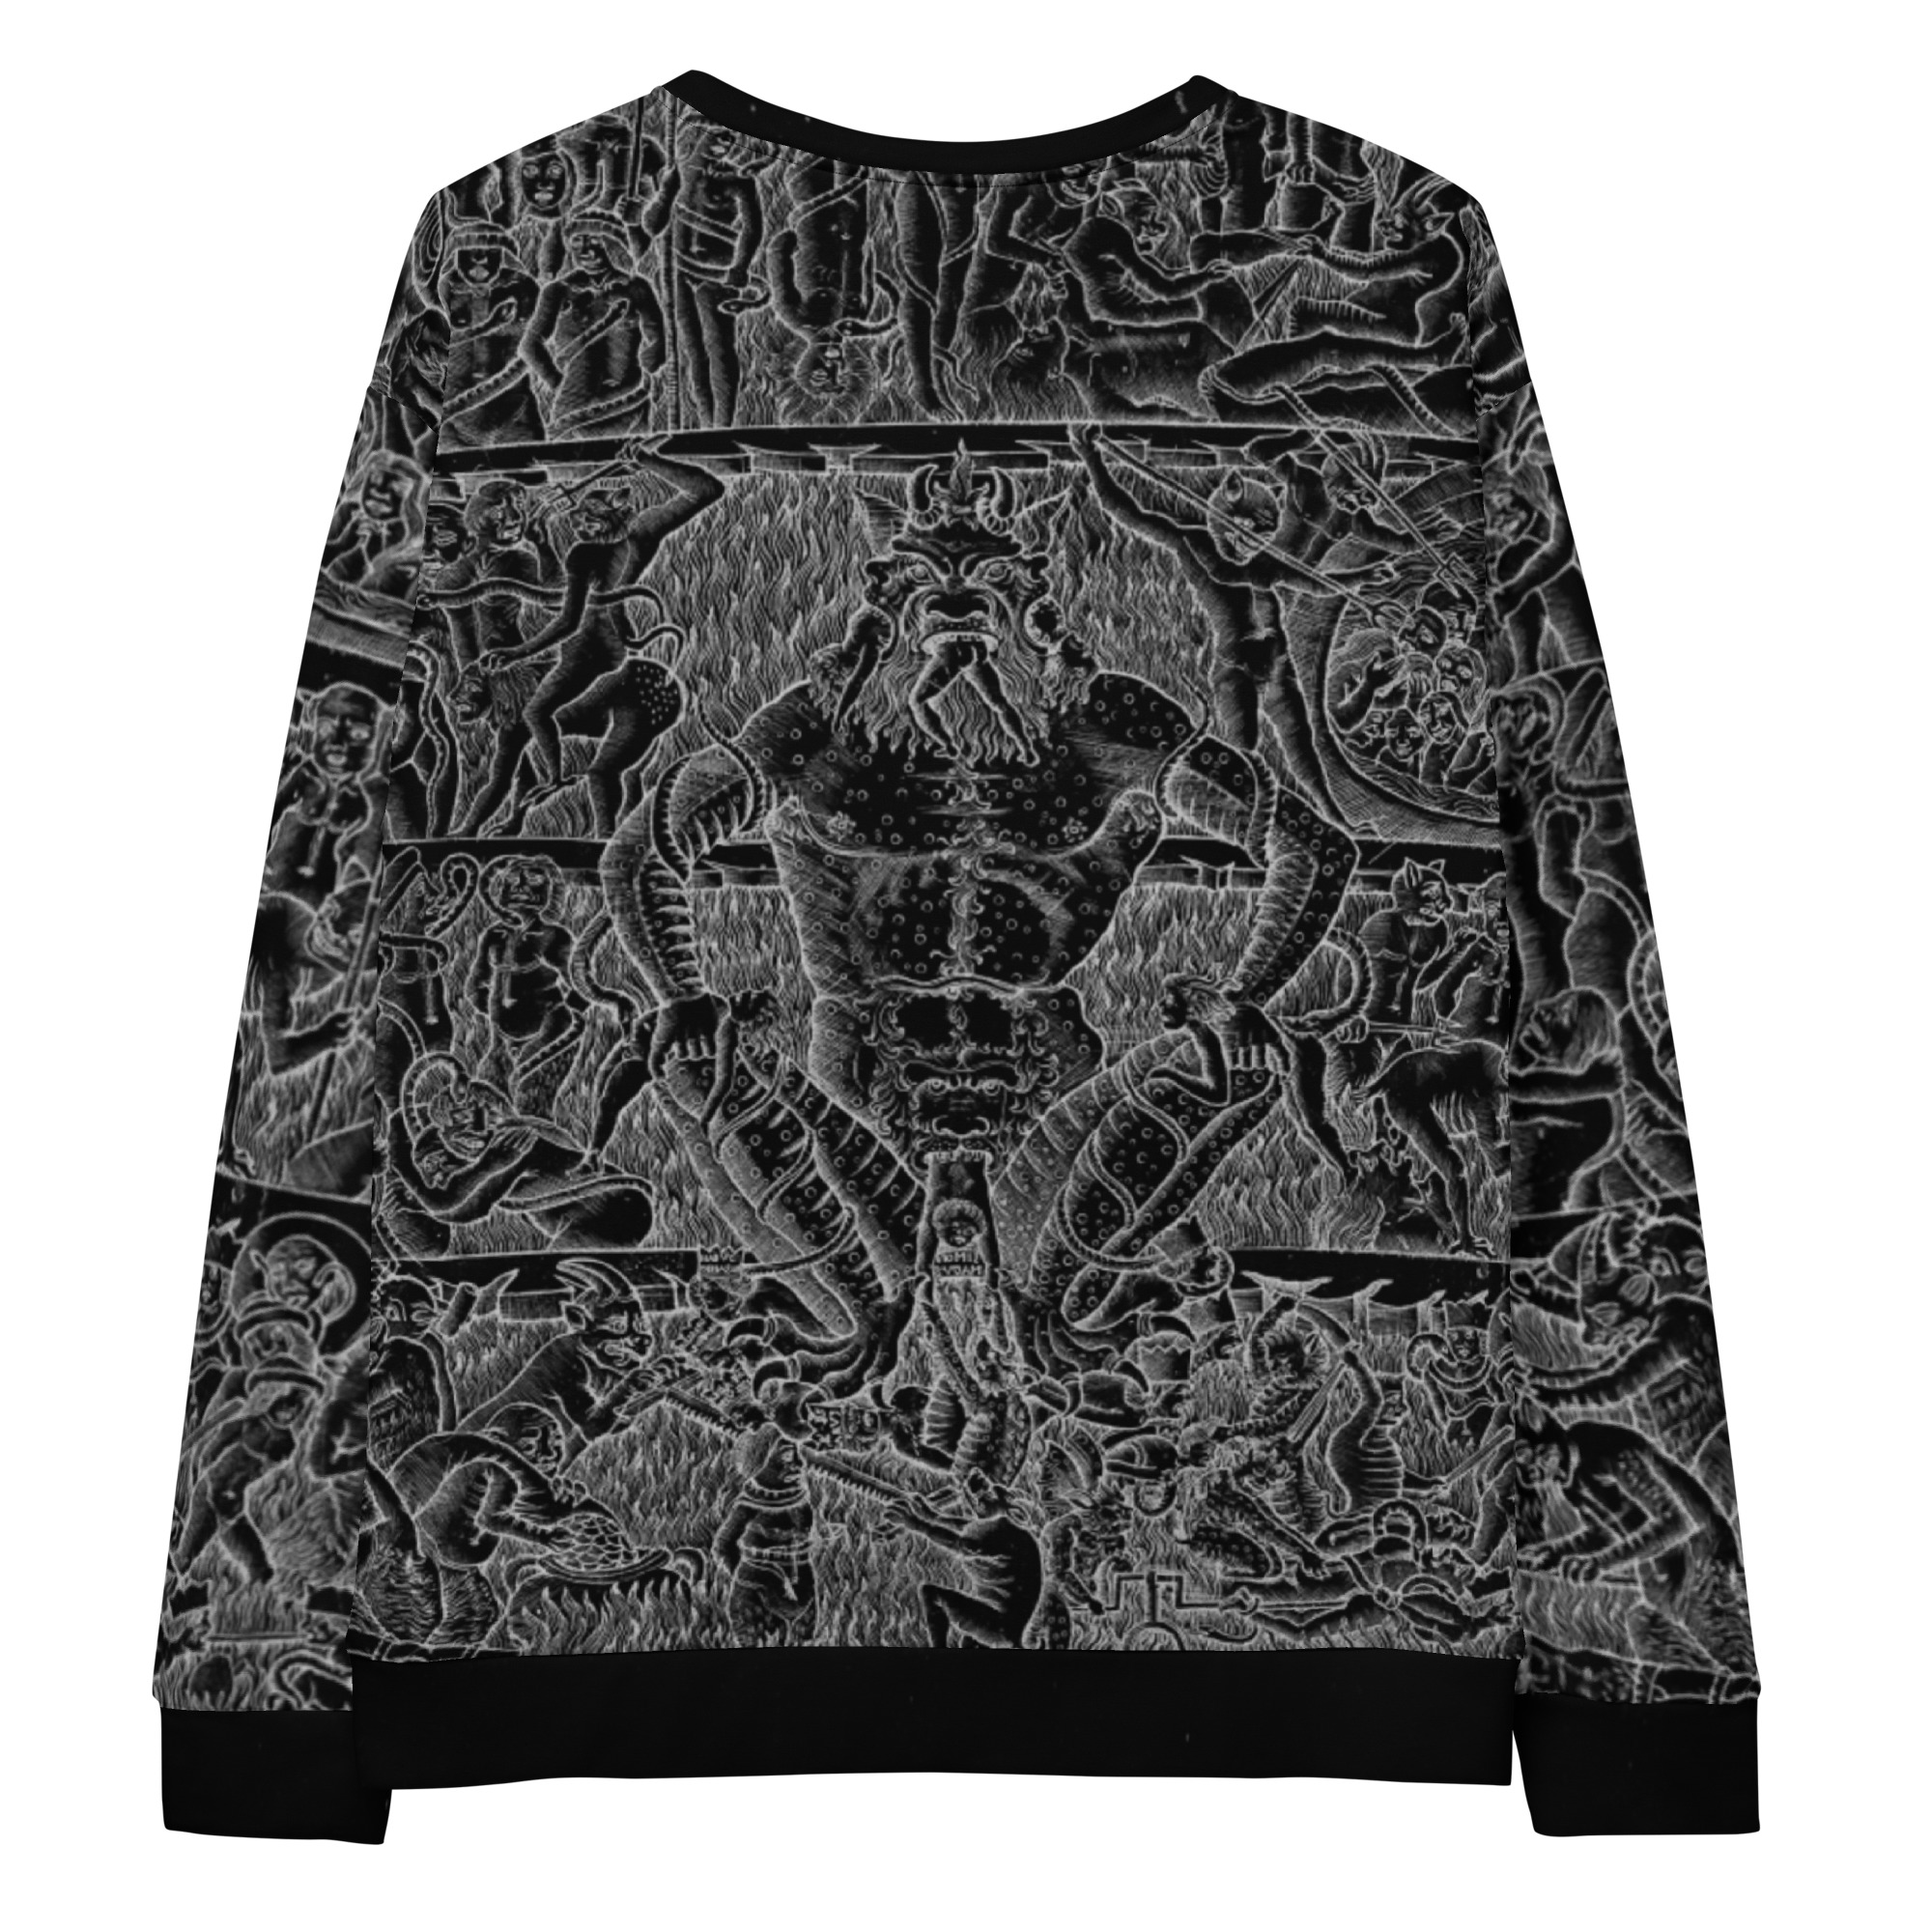 Featured image for “The Inferno. Grey- Unisex Sweatshirt”